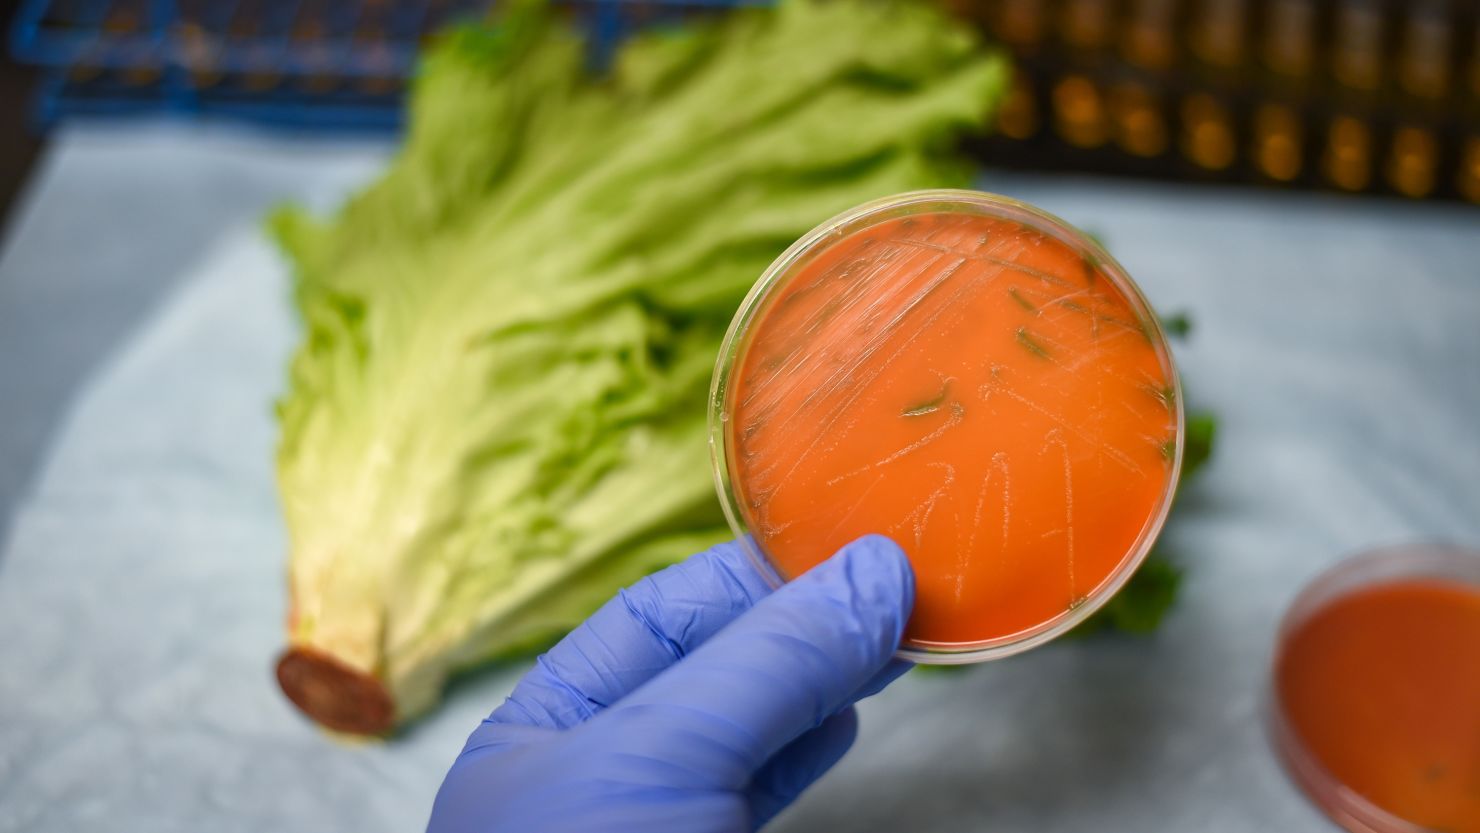 Listeria can grow in cold environments, even the refrigerator, experts say.